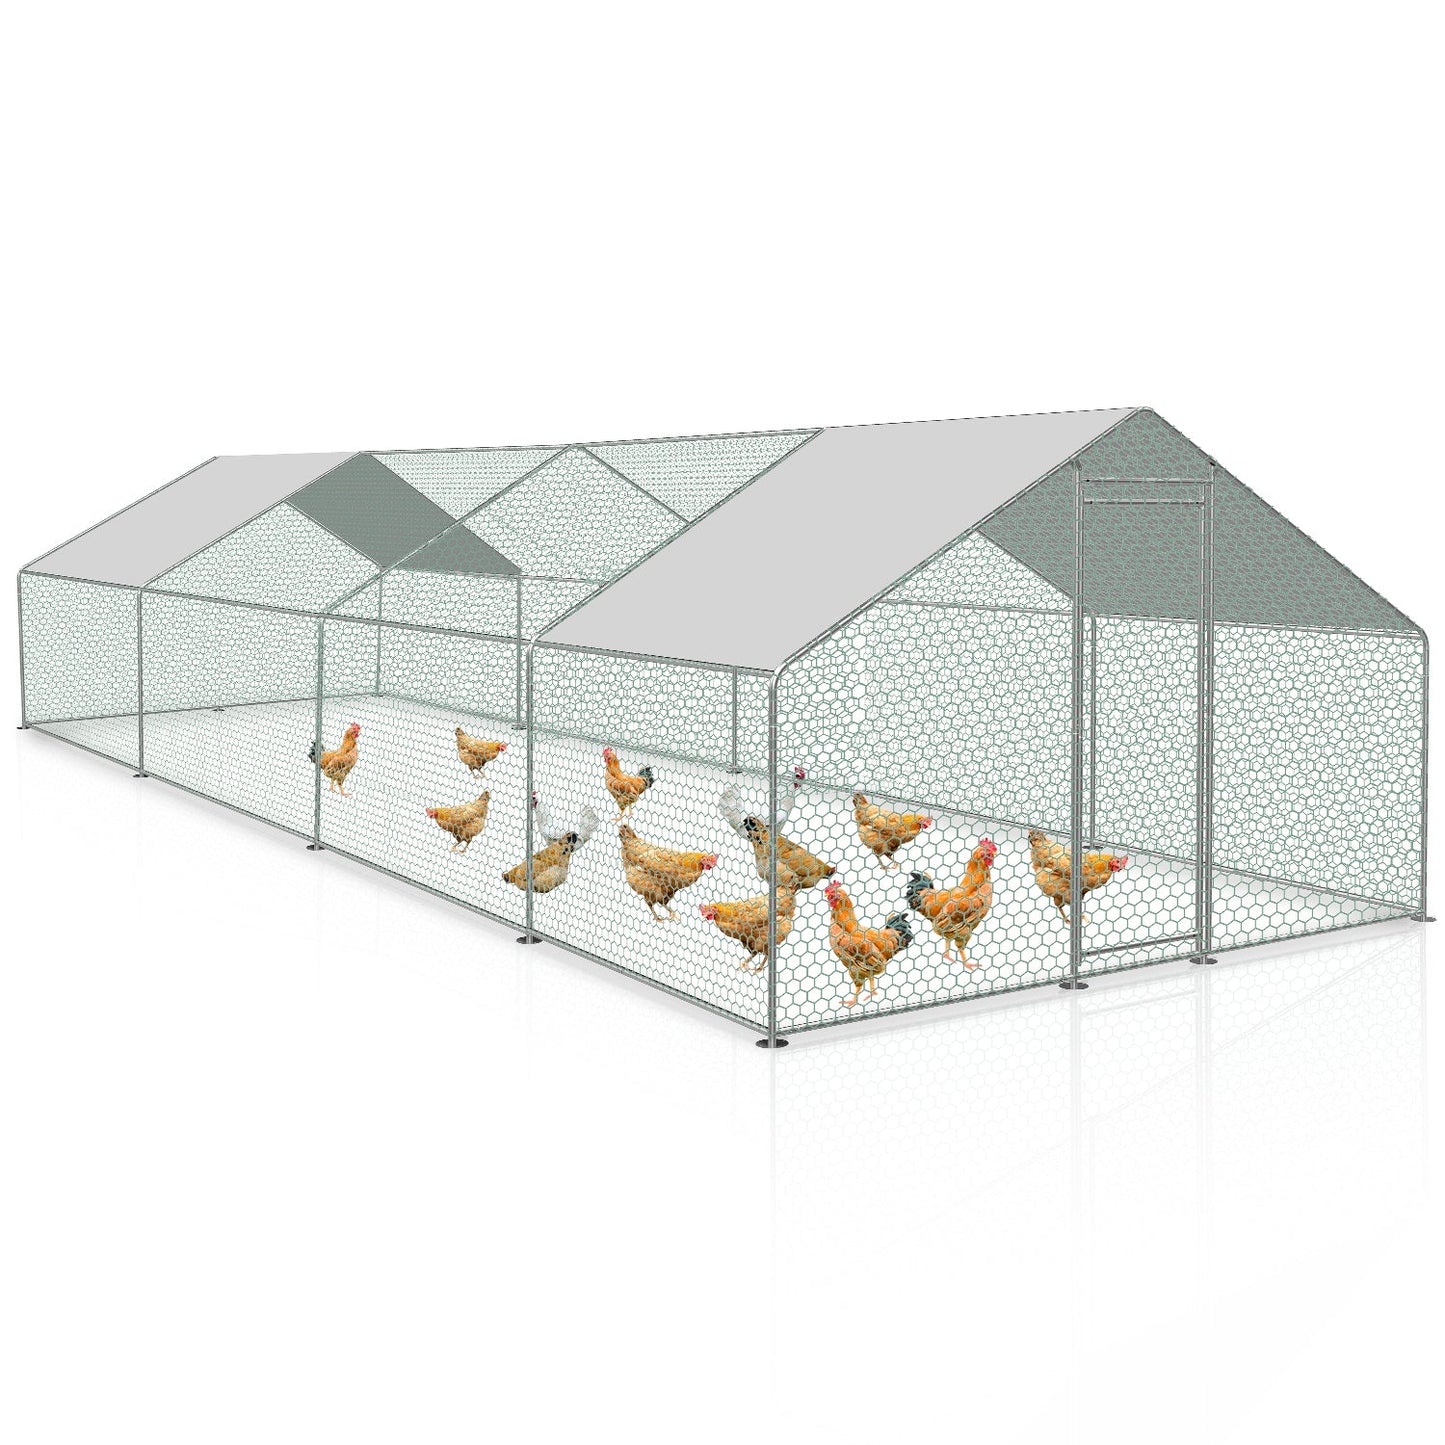 Chicken coop with PE color cloth 3x8x2m